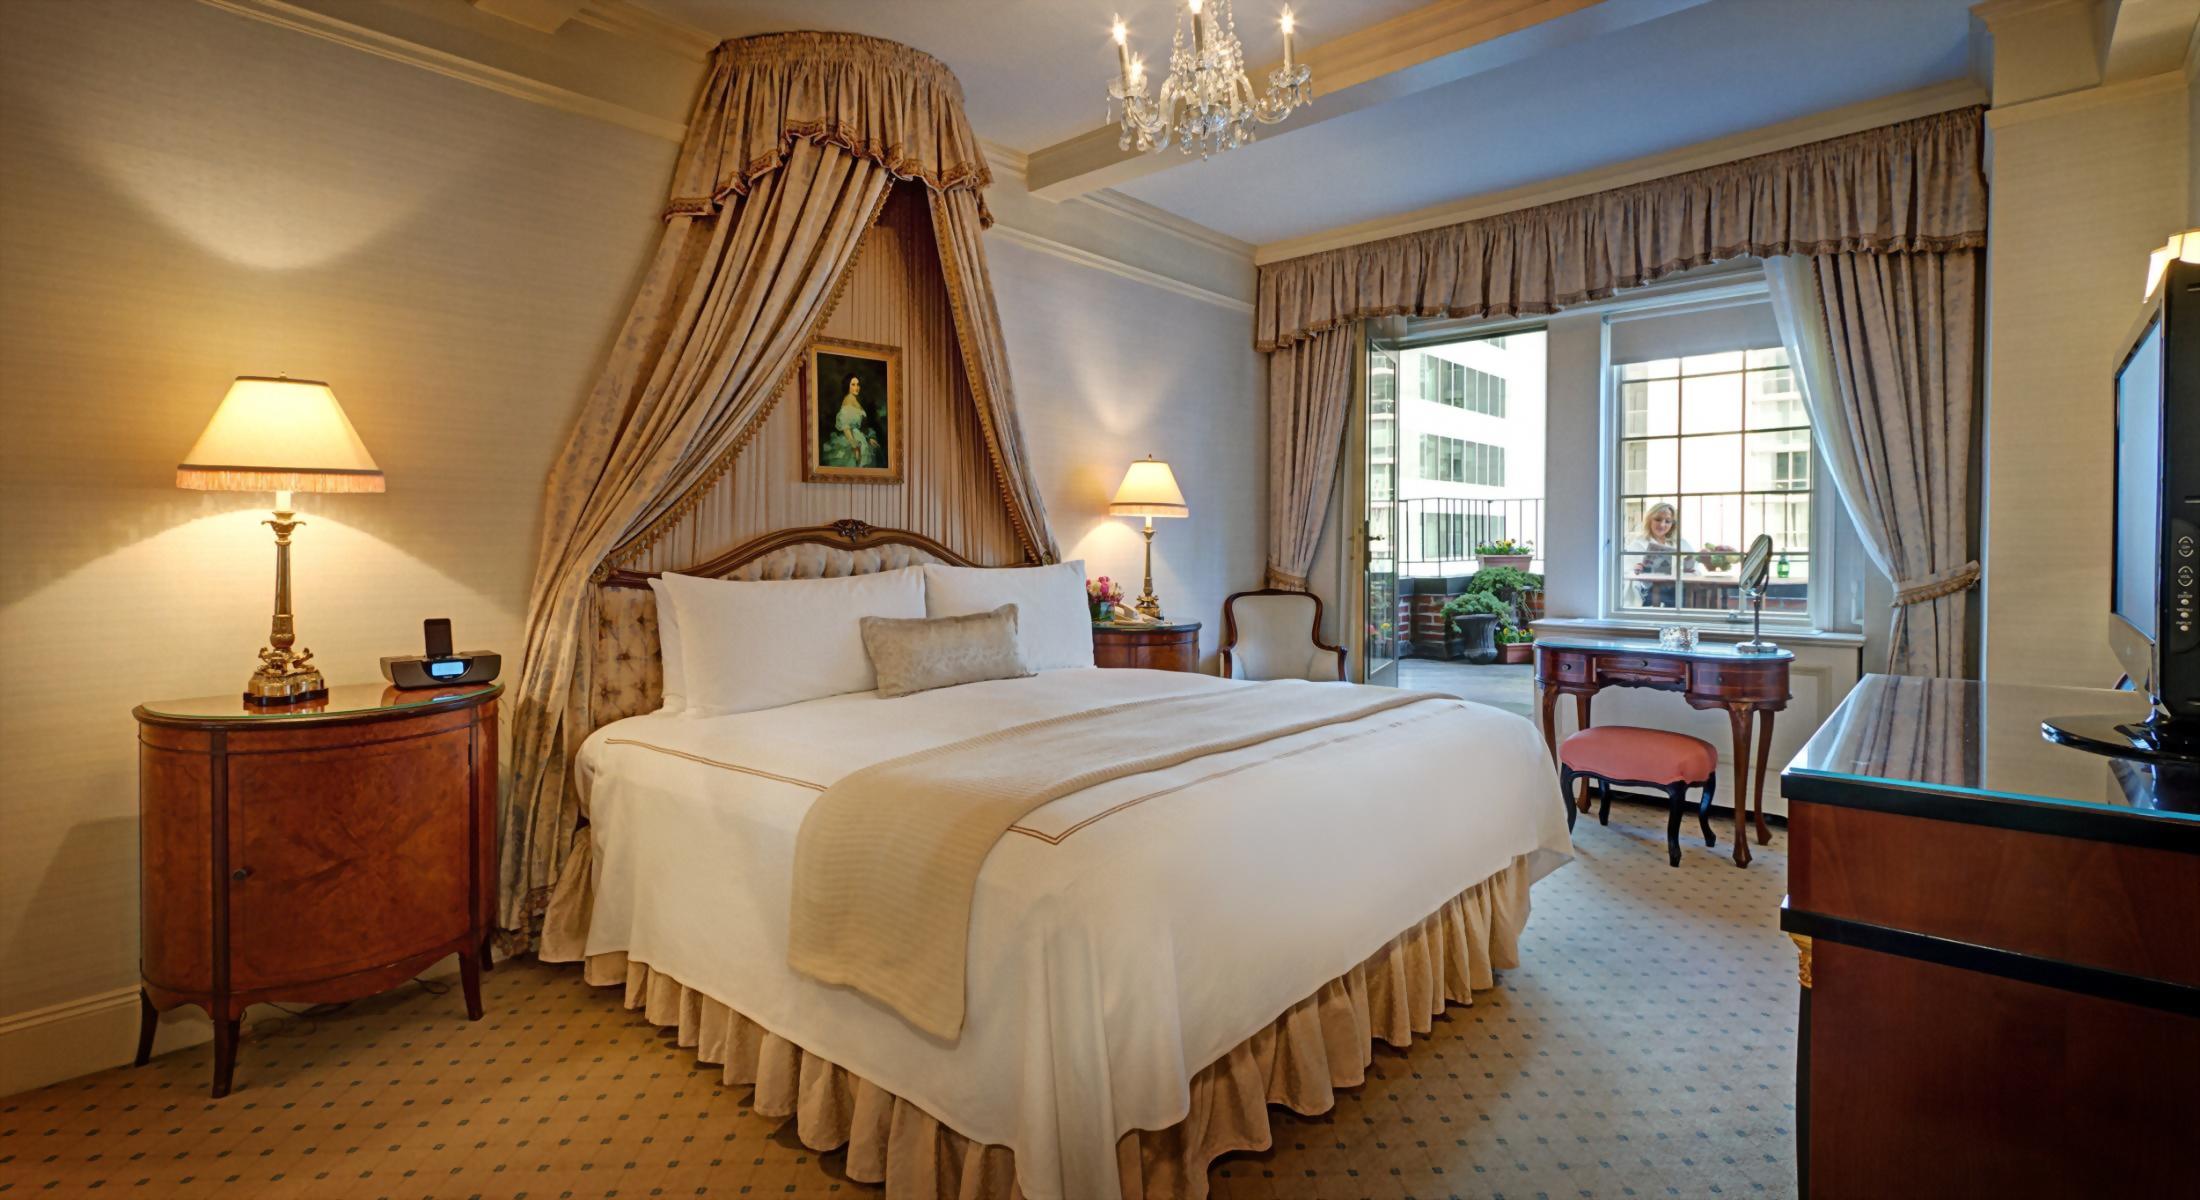 Bedroom of the Presidential Suite honoring Vladimir Horowitz at the Hotel Elysee.  This room has a beautiful balcony off the bedroom.